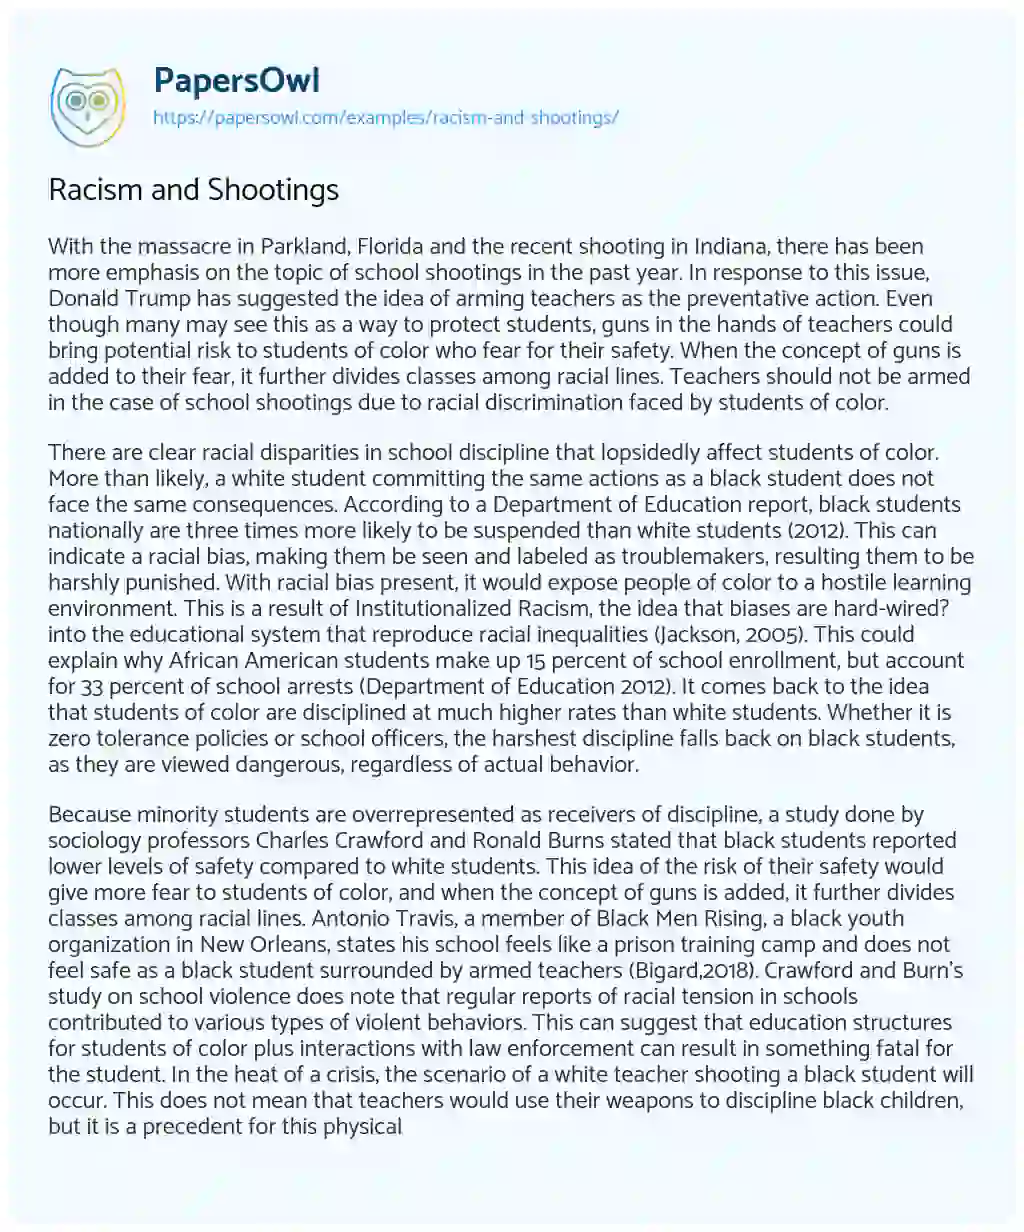 Essay on Racism and Shootings